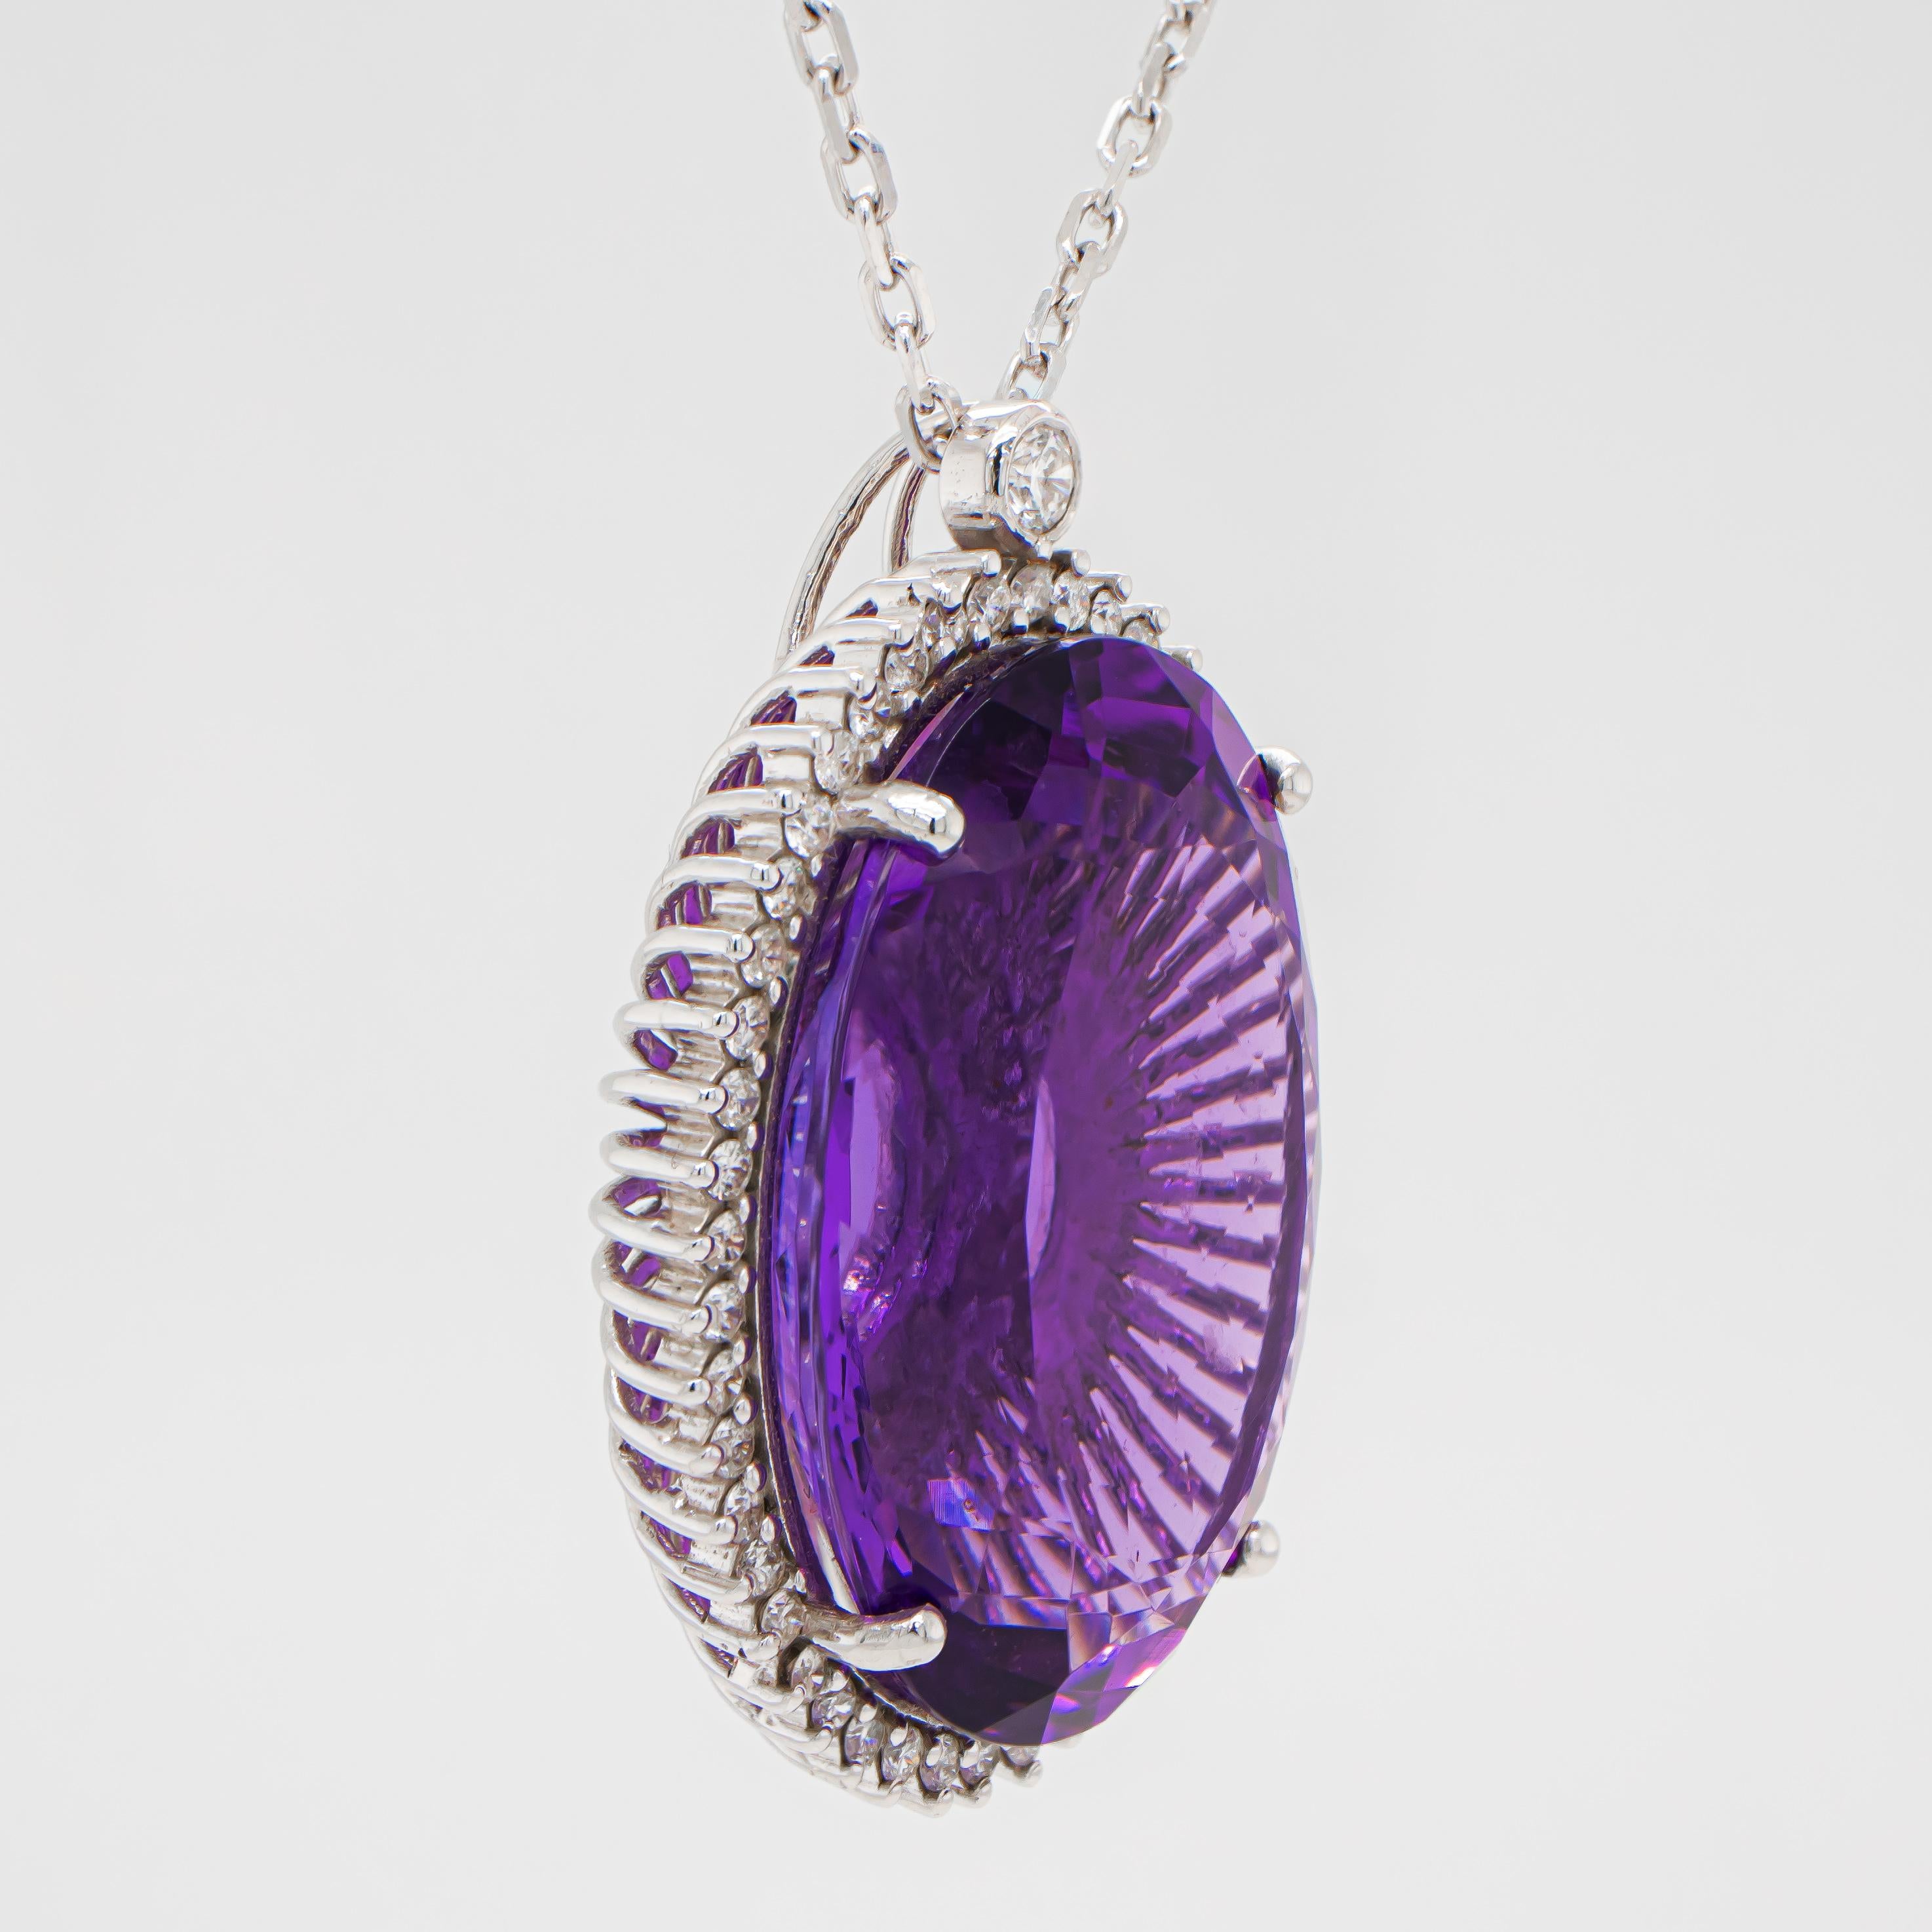 Oval Cut Oval Amethyst Pendant 36.5 Carats with Diamonds 18K Gold